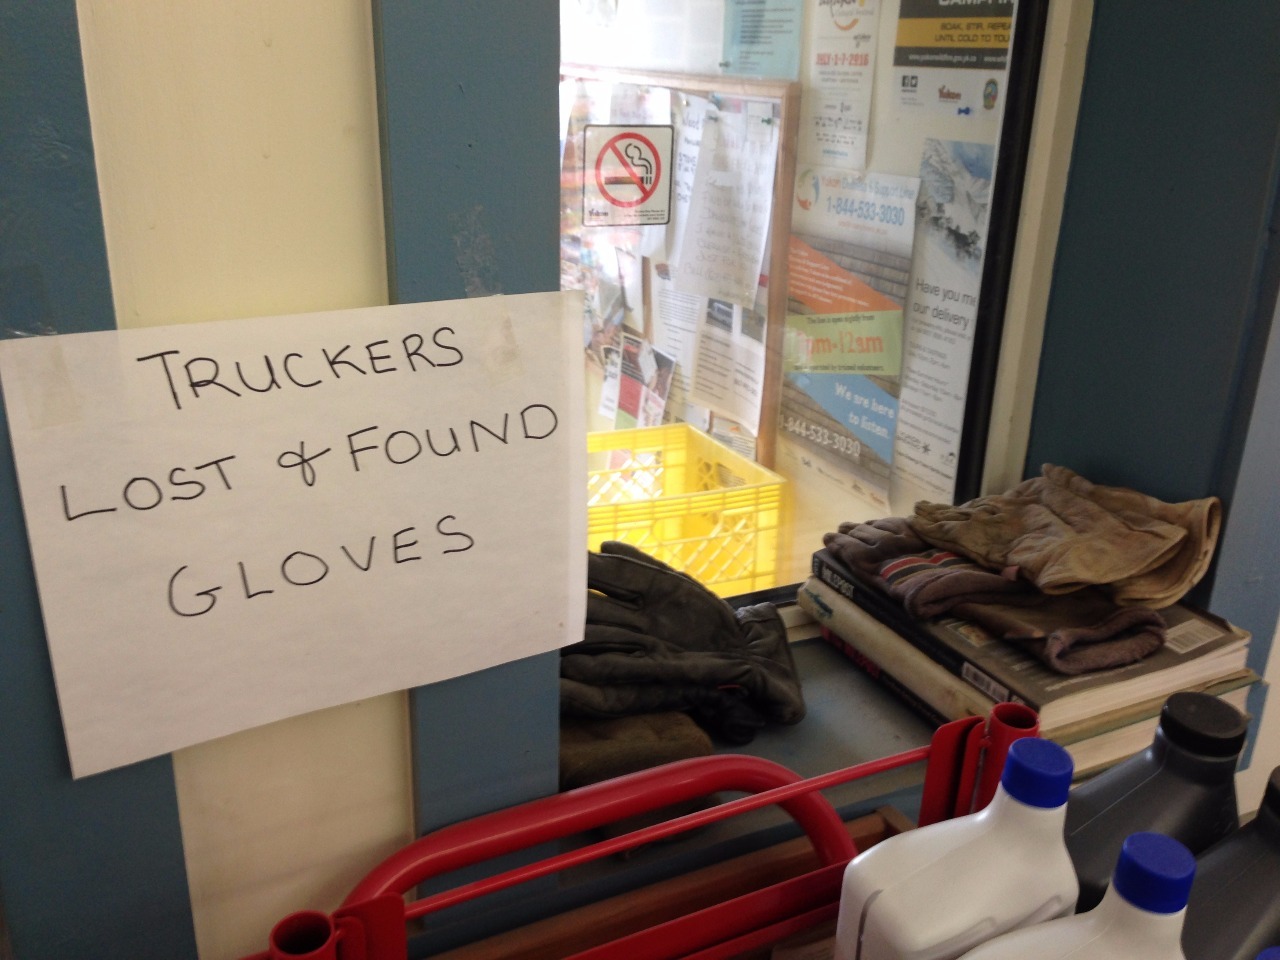 Free Lost Truckers Gloves!